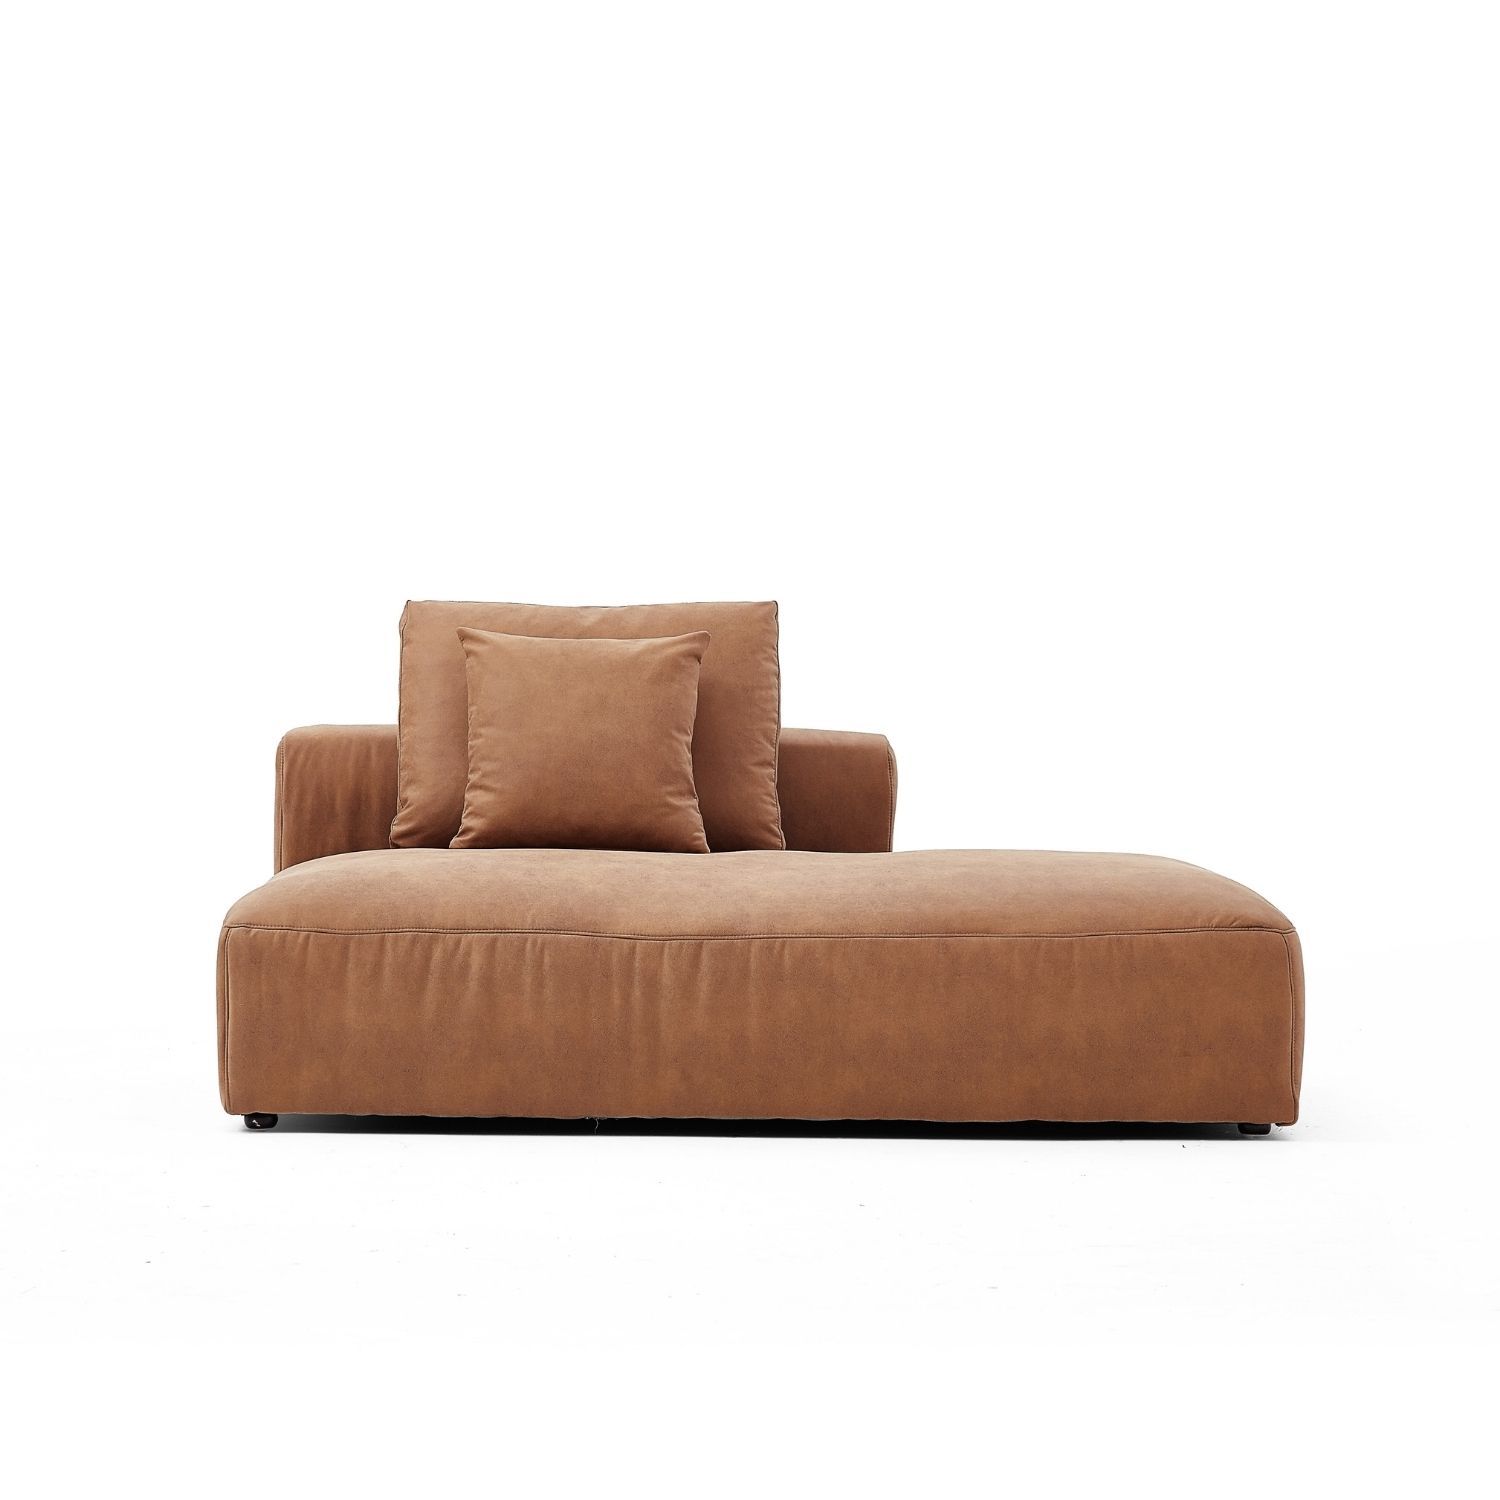 The 5th Side Lounge Sofa Foundry Camel Facing Left 71 Inch